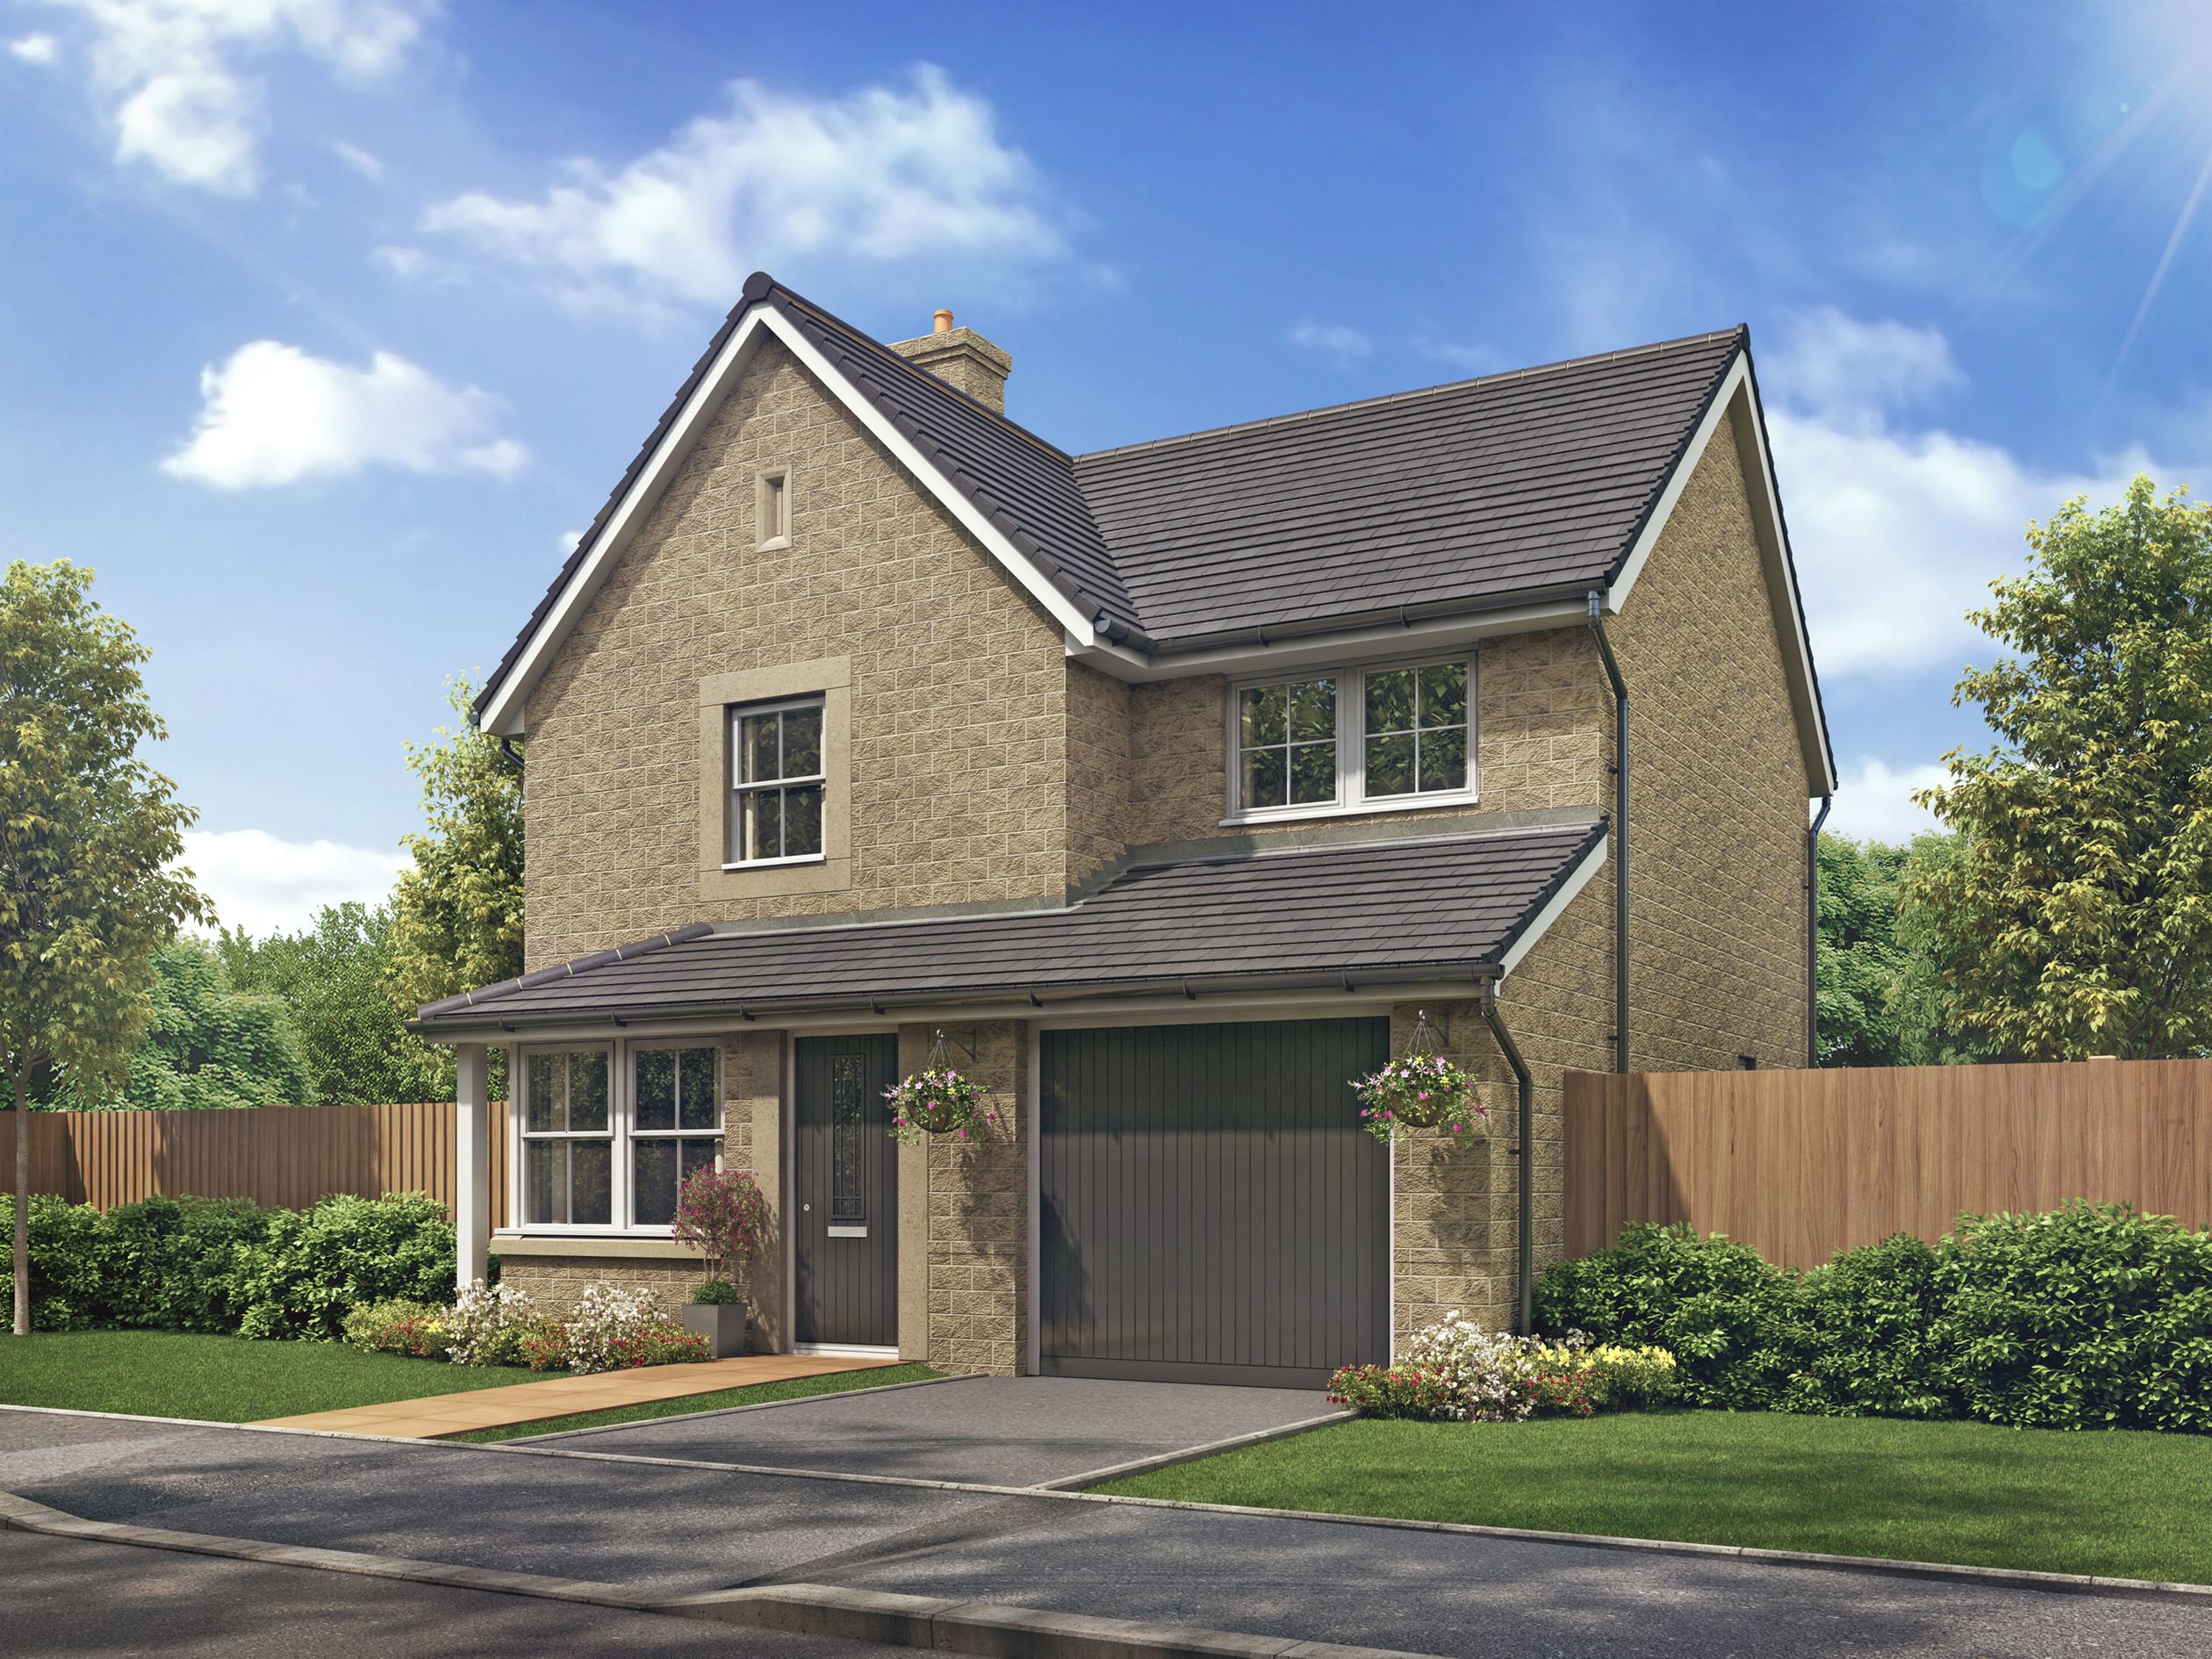 Property 1 of 1. CGI Image Of The Andover At Midshires Meadow